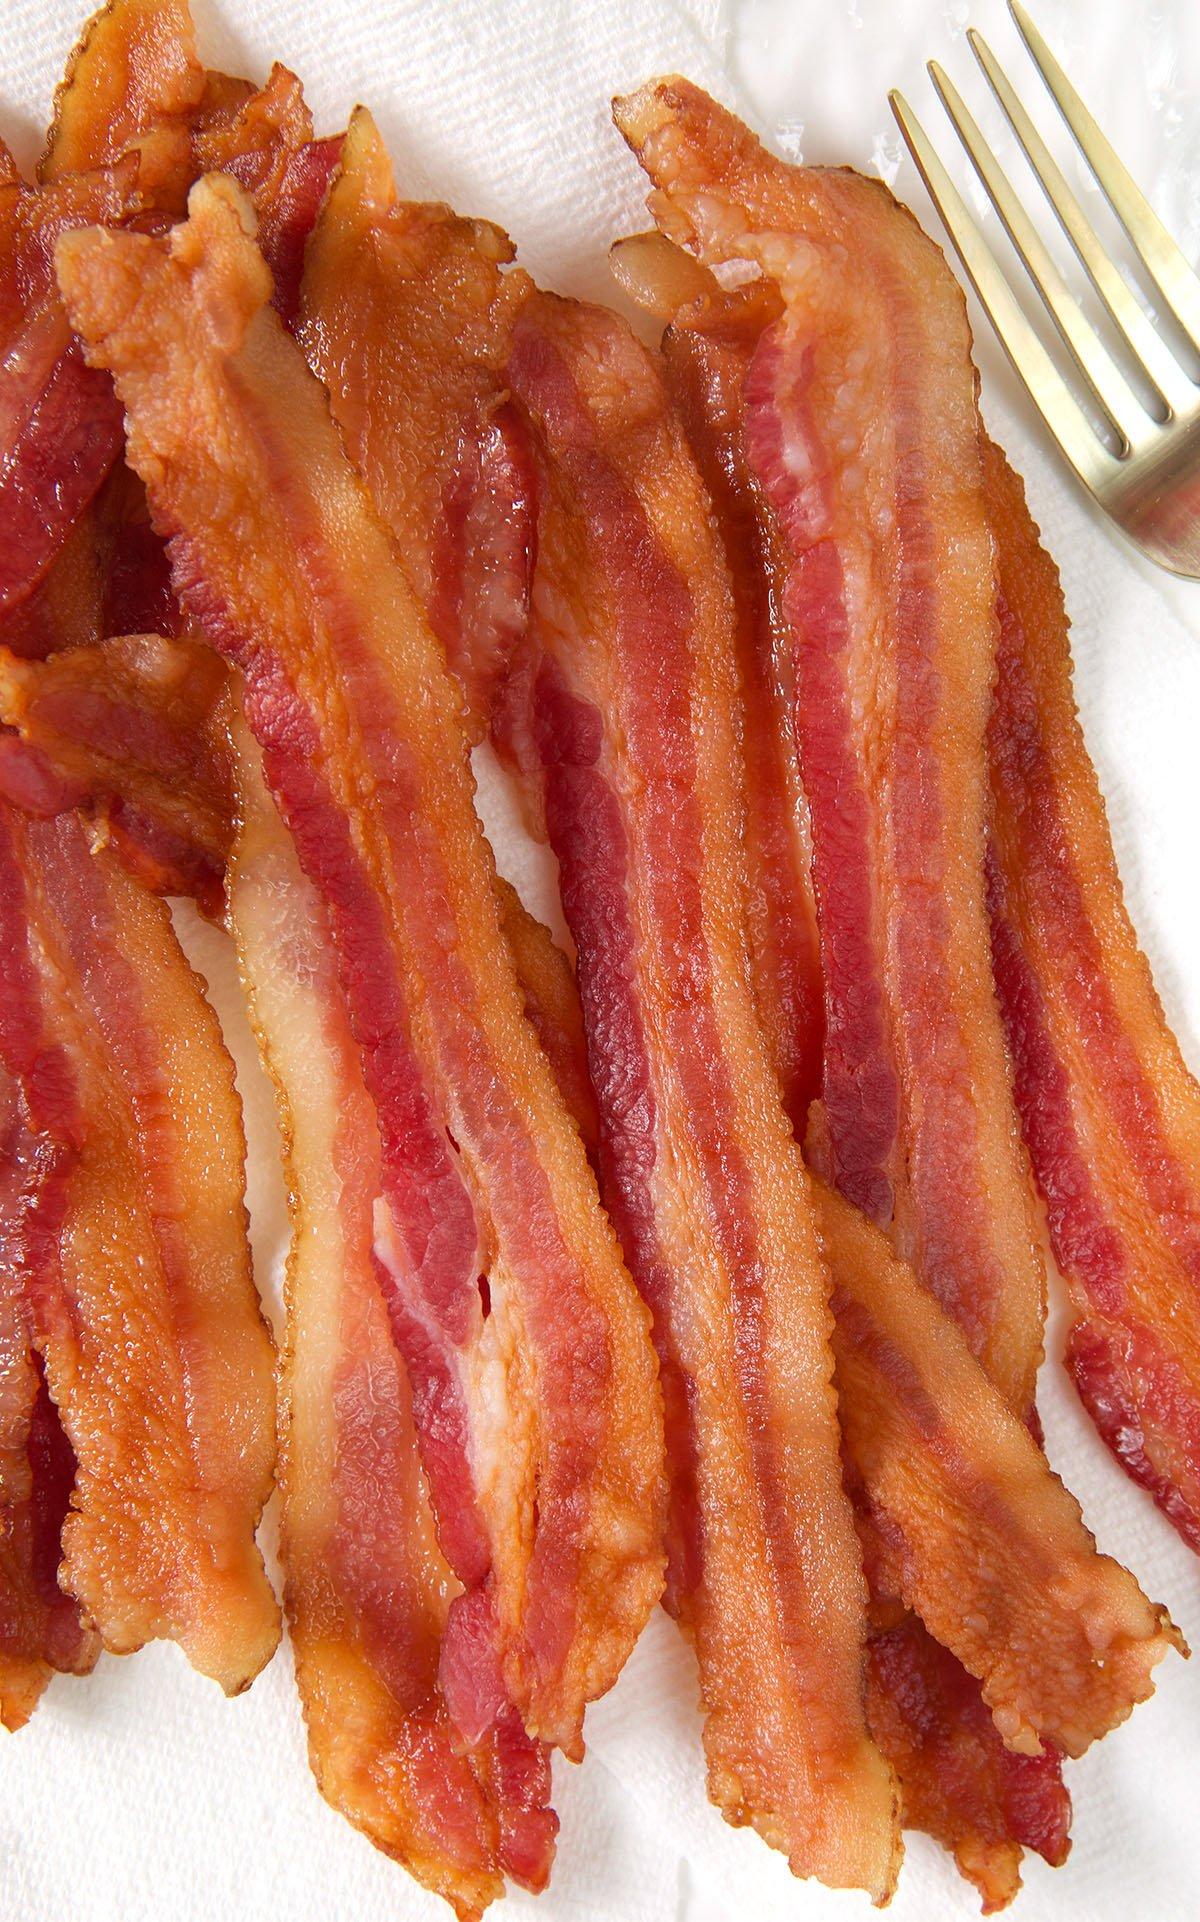 A stack of cooked bacon is placed on a paper towel.